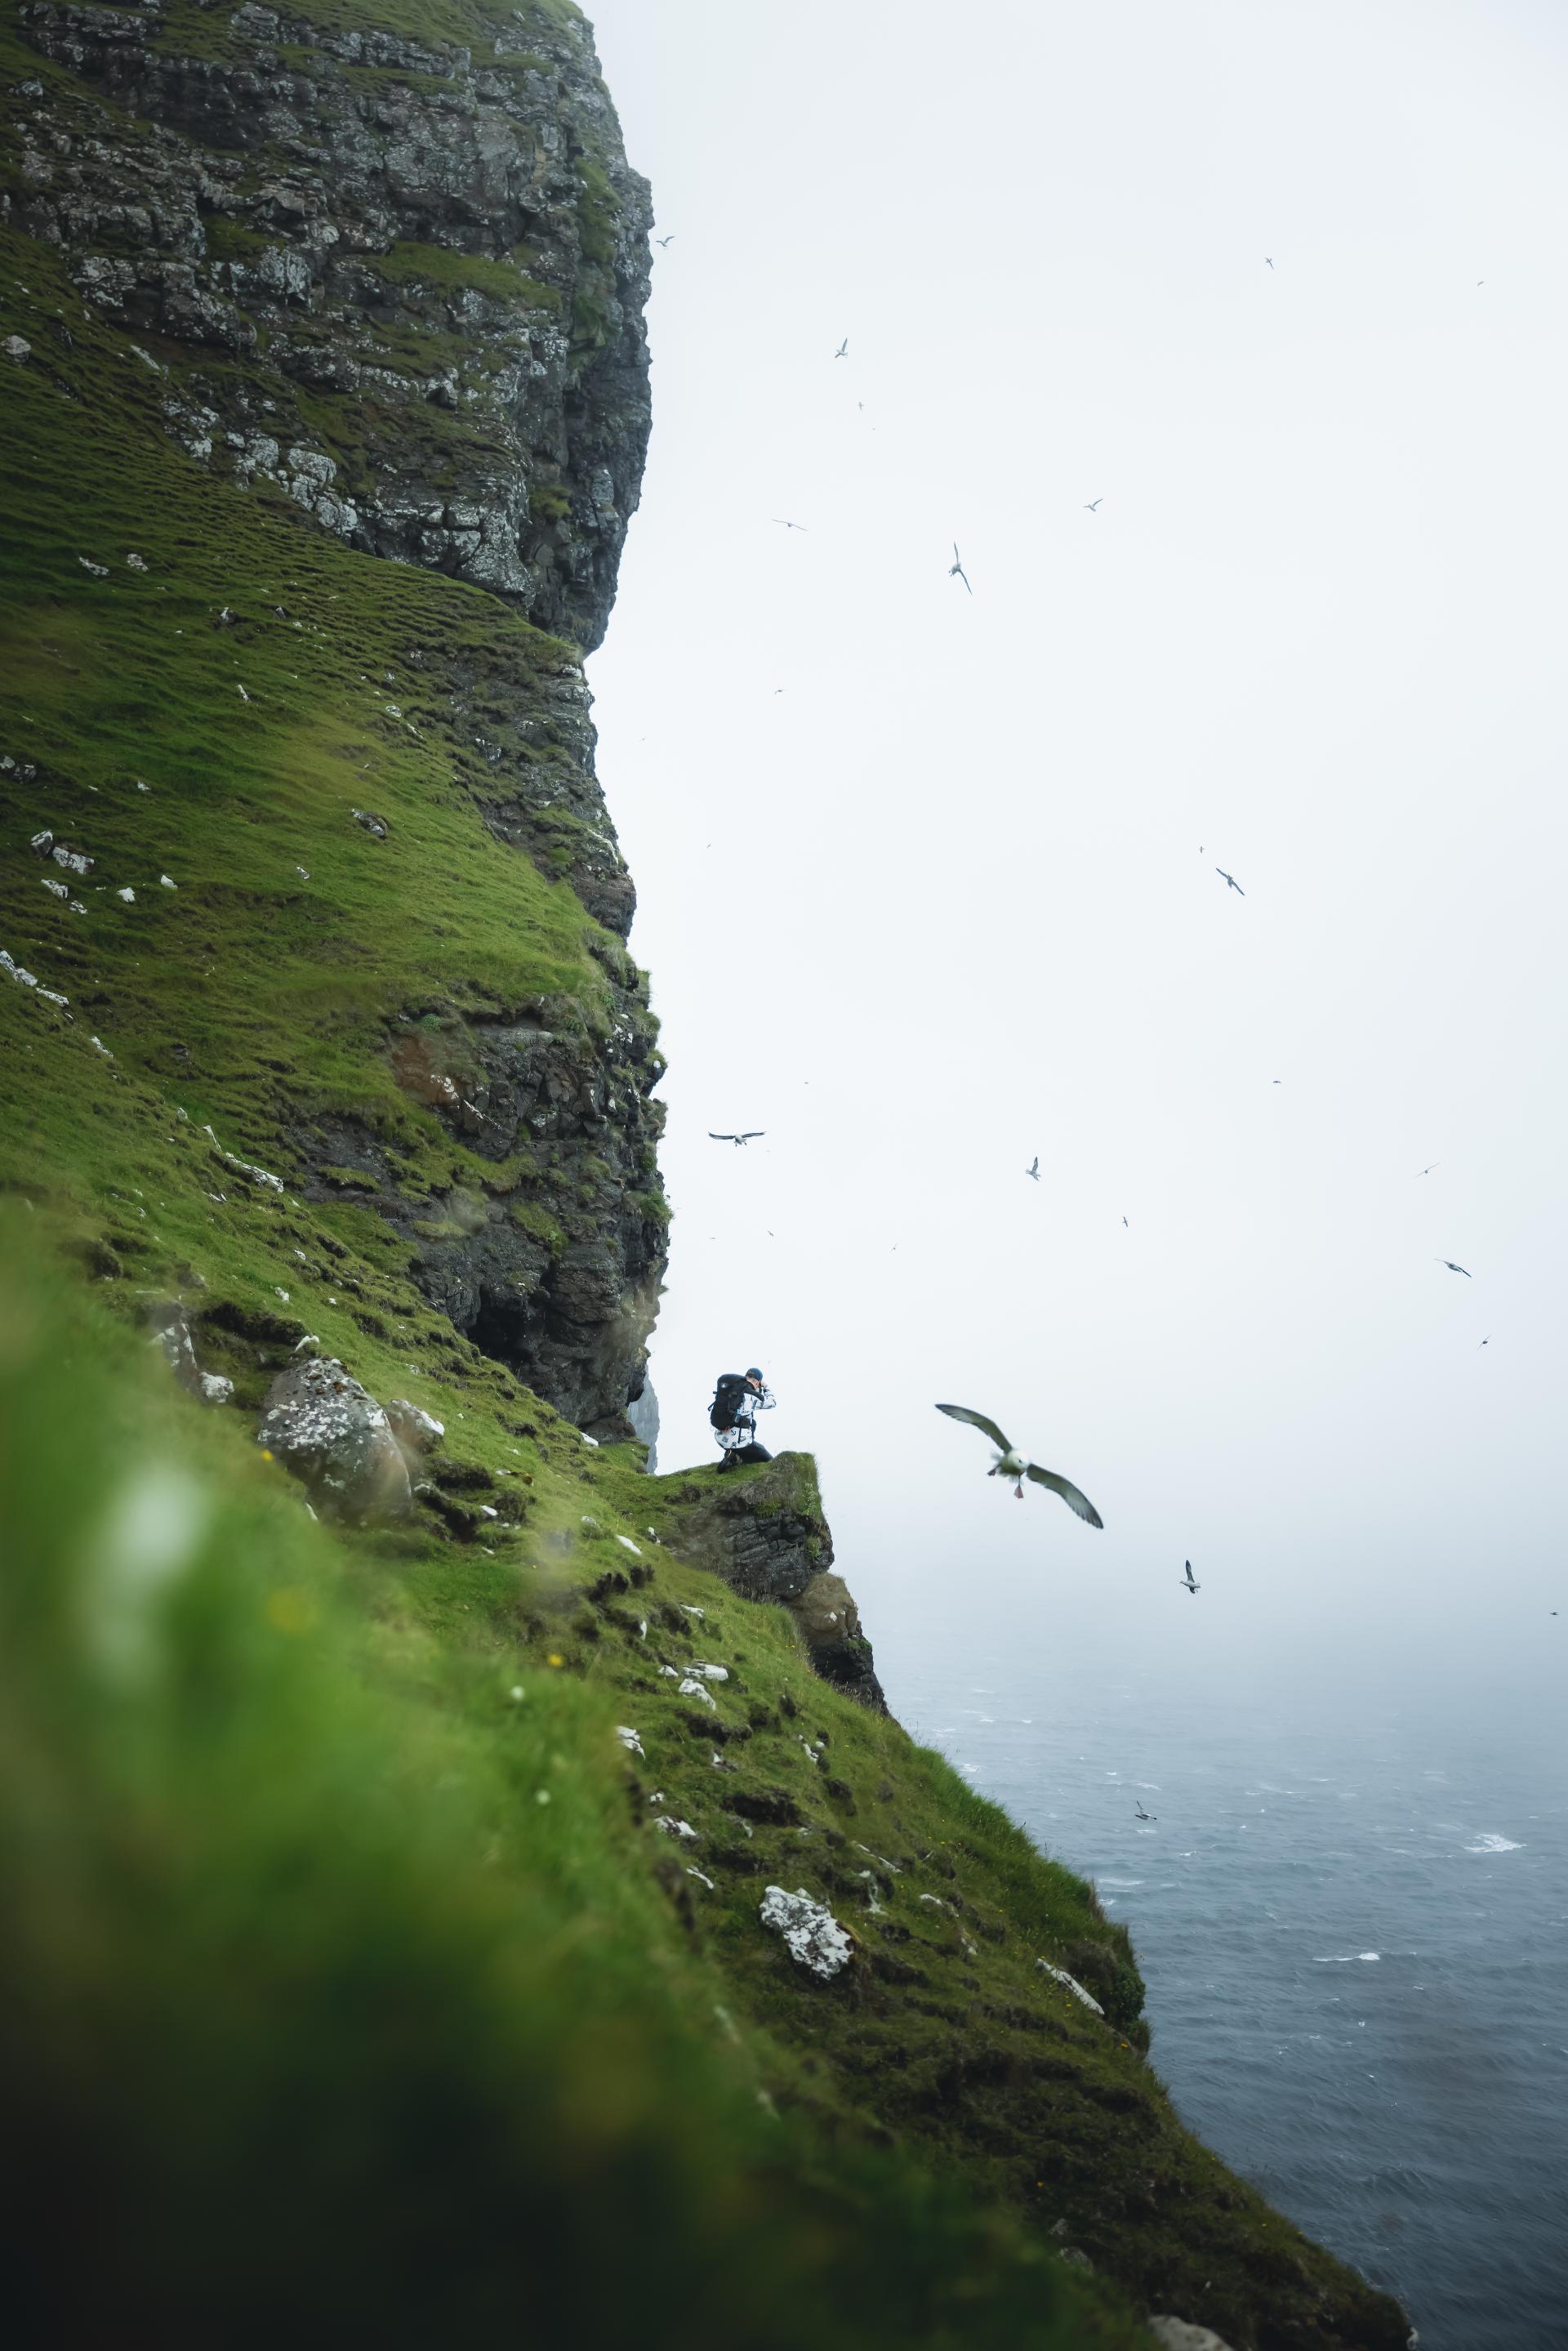 Thumbnail of - Bird watching, over the green cliffs of the Faroe Islands. Tourists capturing images. 